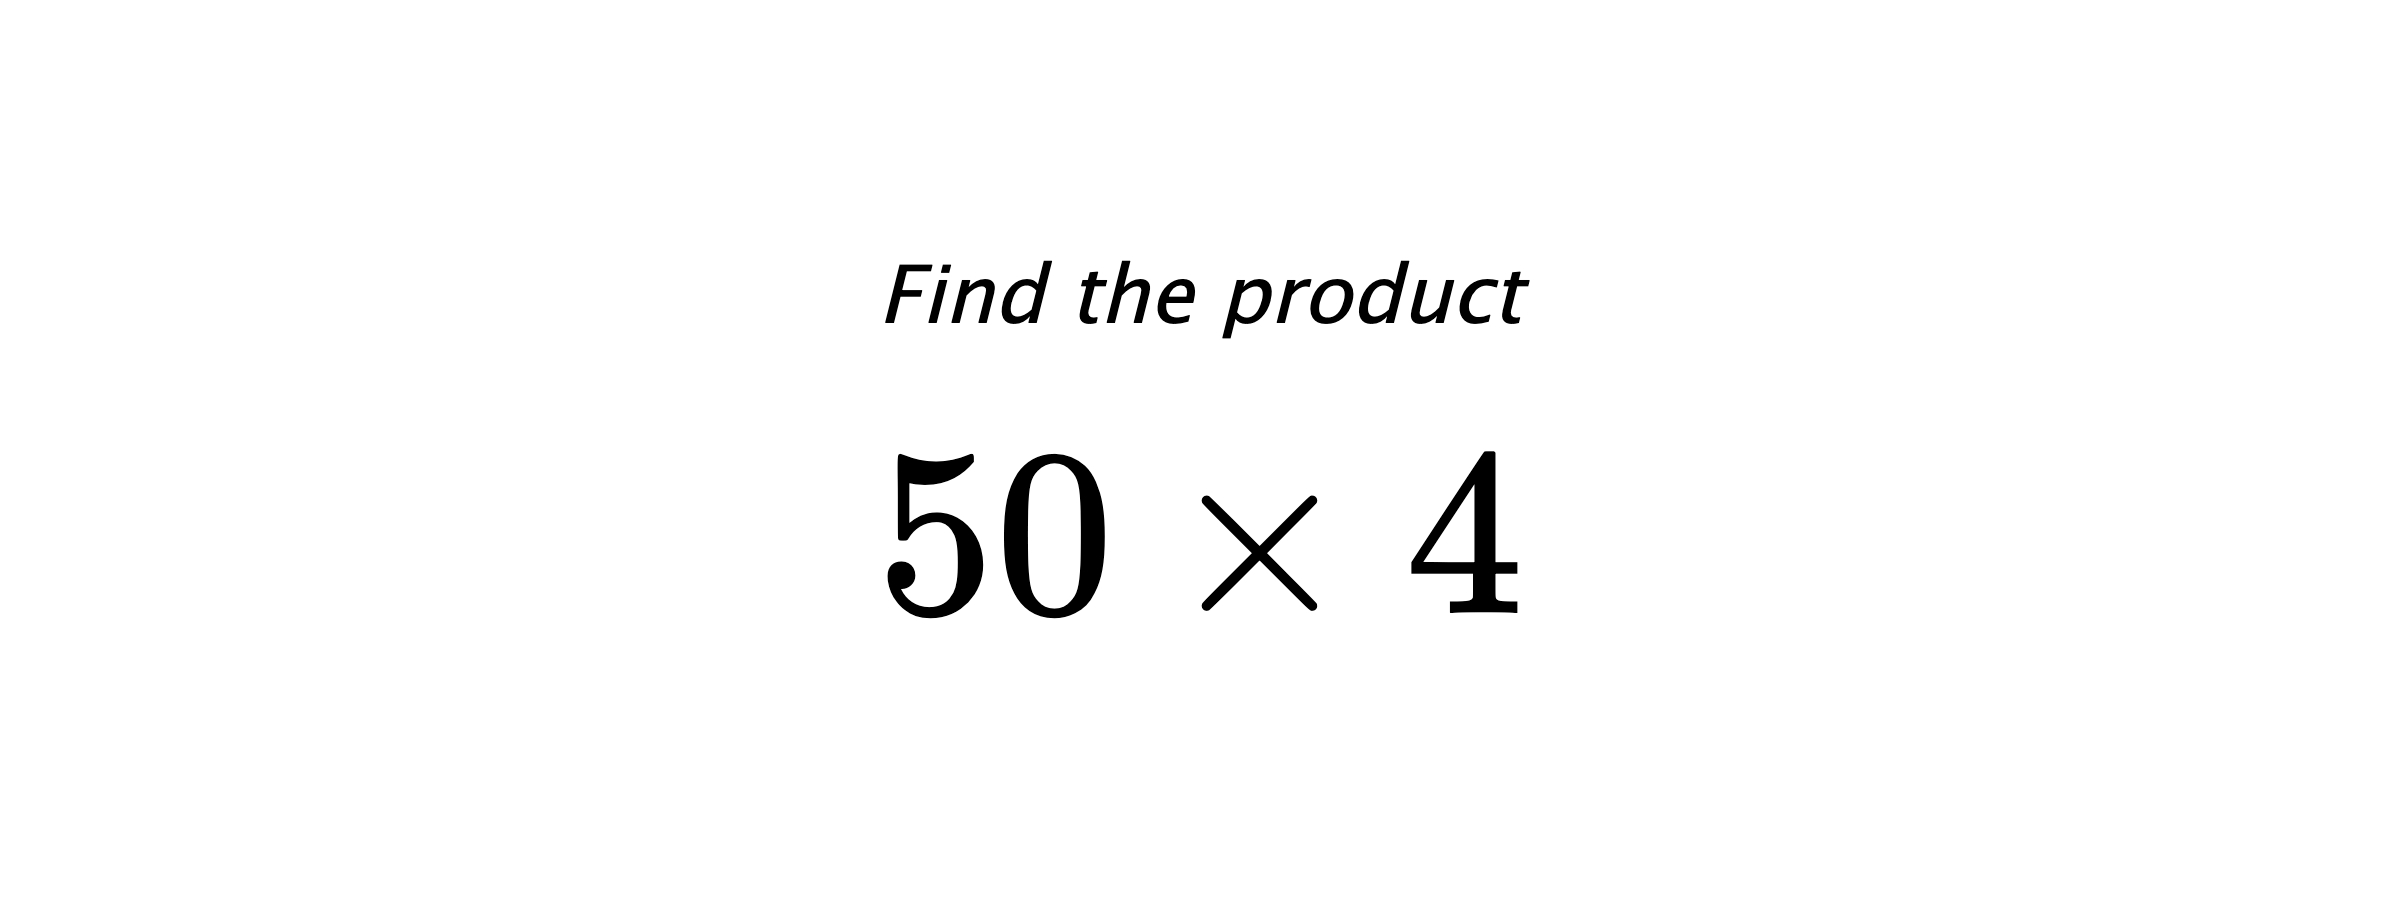 Find the product $ 50 \times 4 $